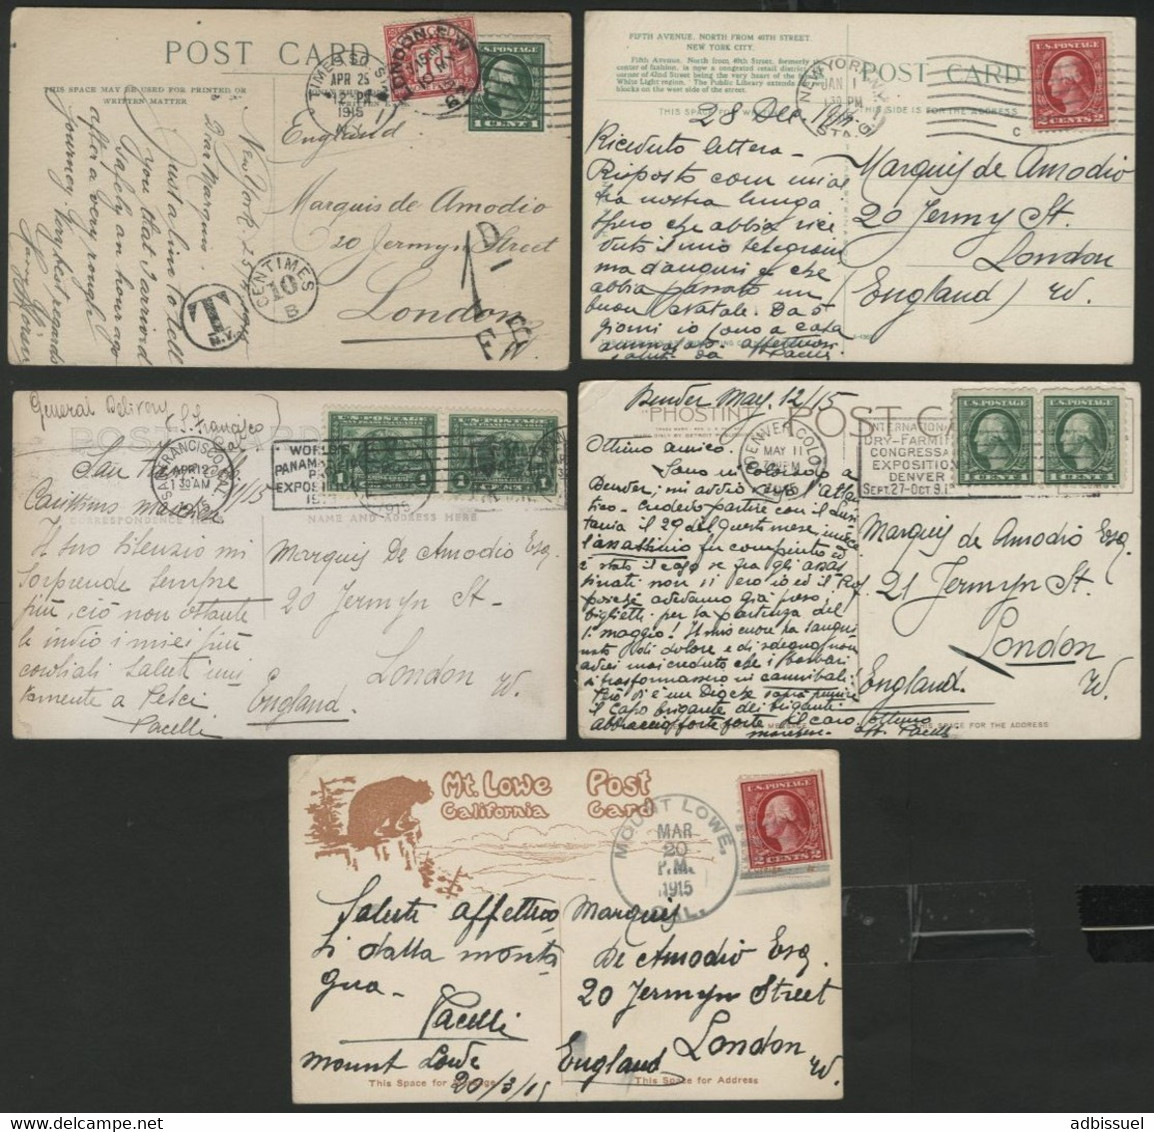 Set of 27 Postcards written in 1914 - 1915 with various themes. All written to the "Marquis De Amodio" in London.